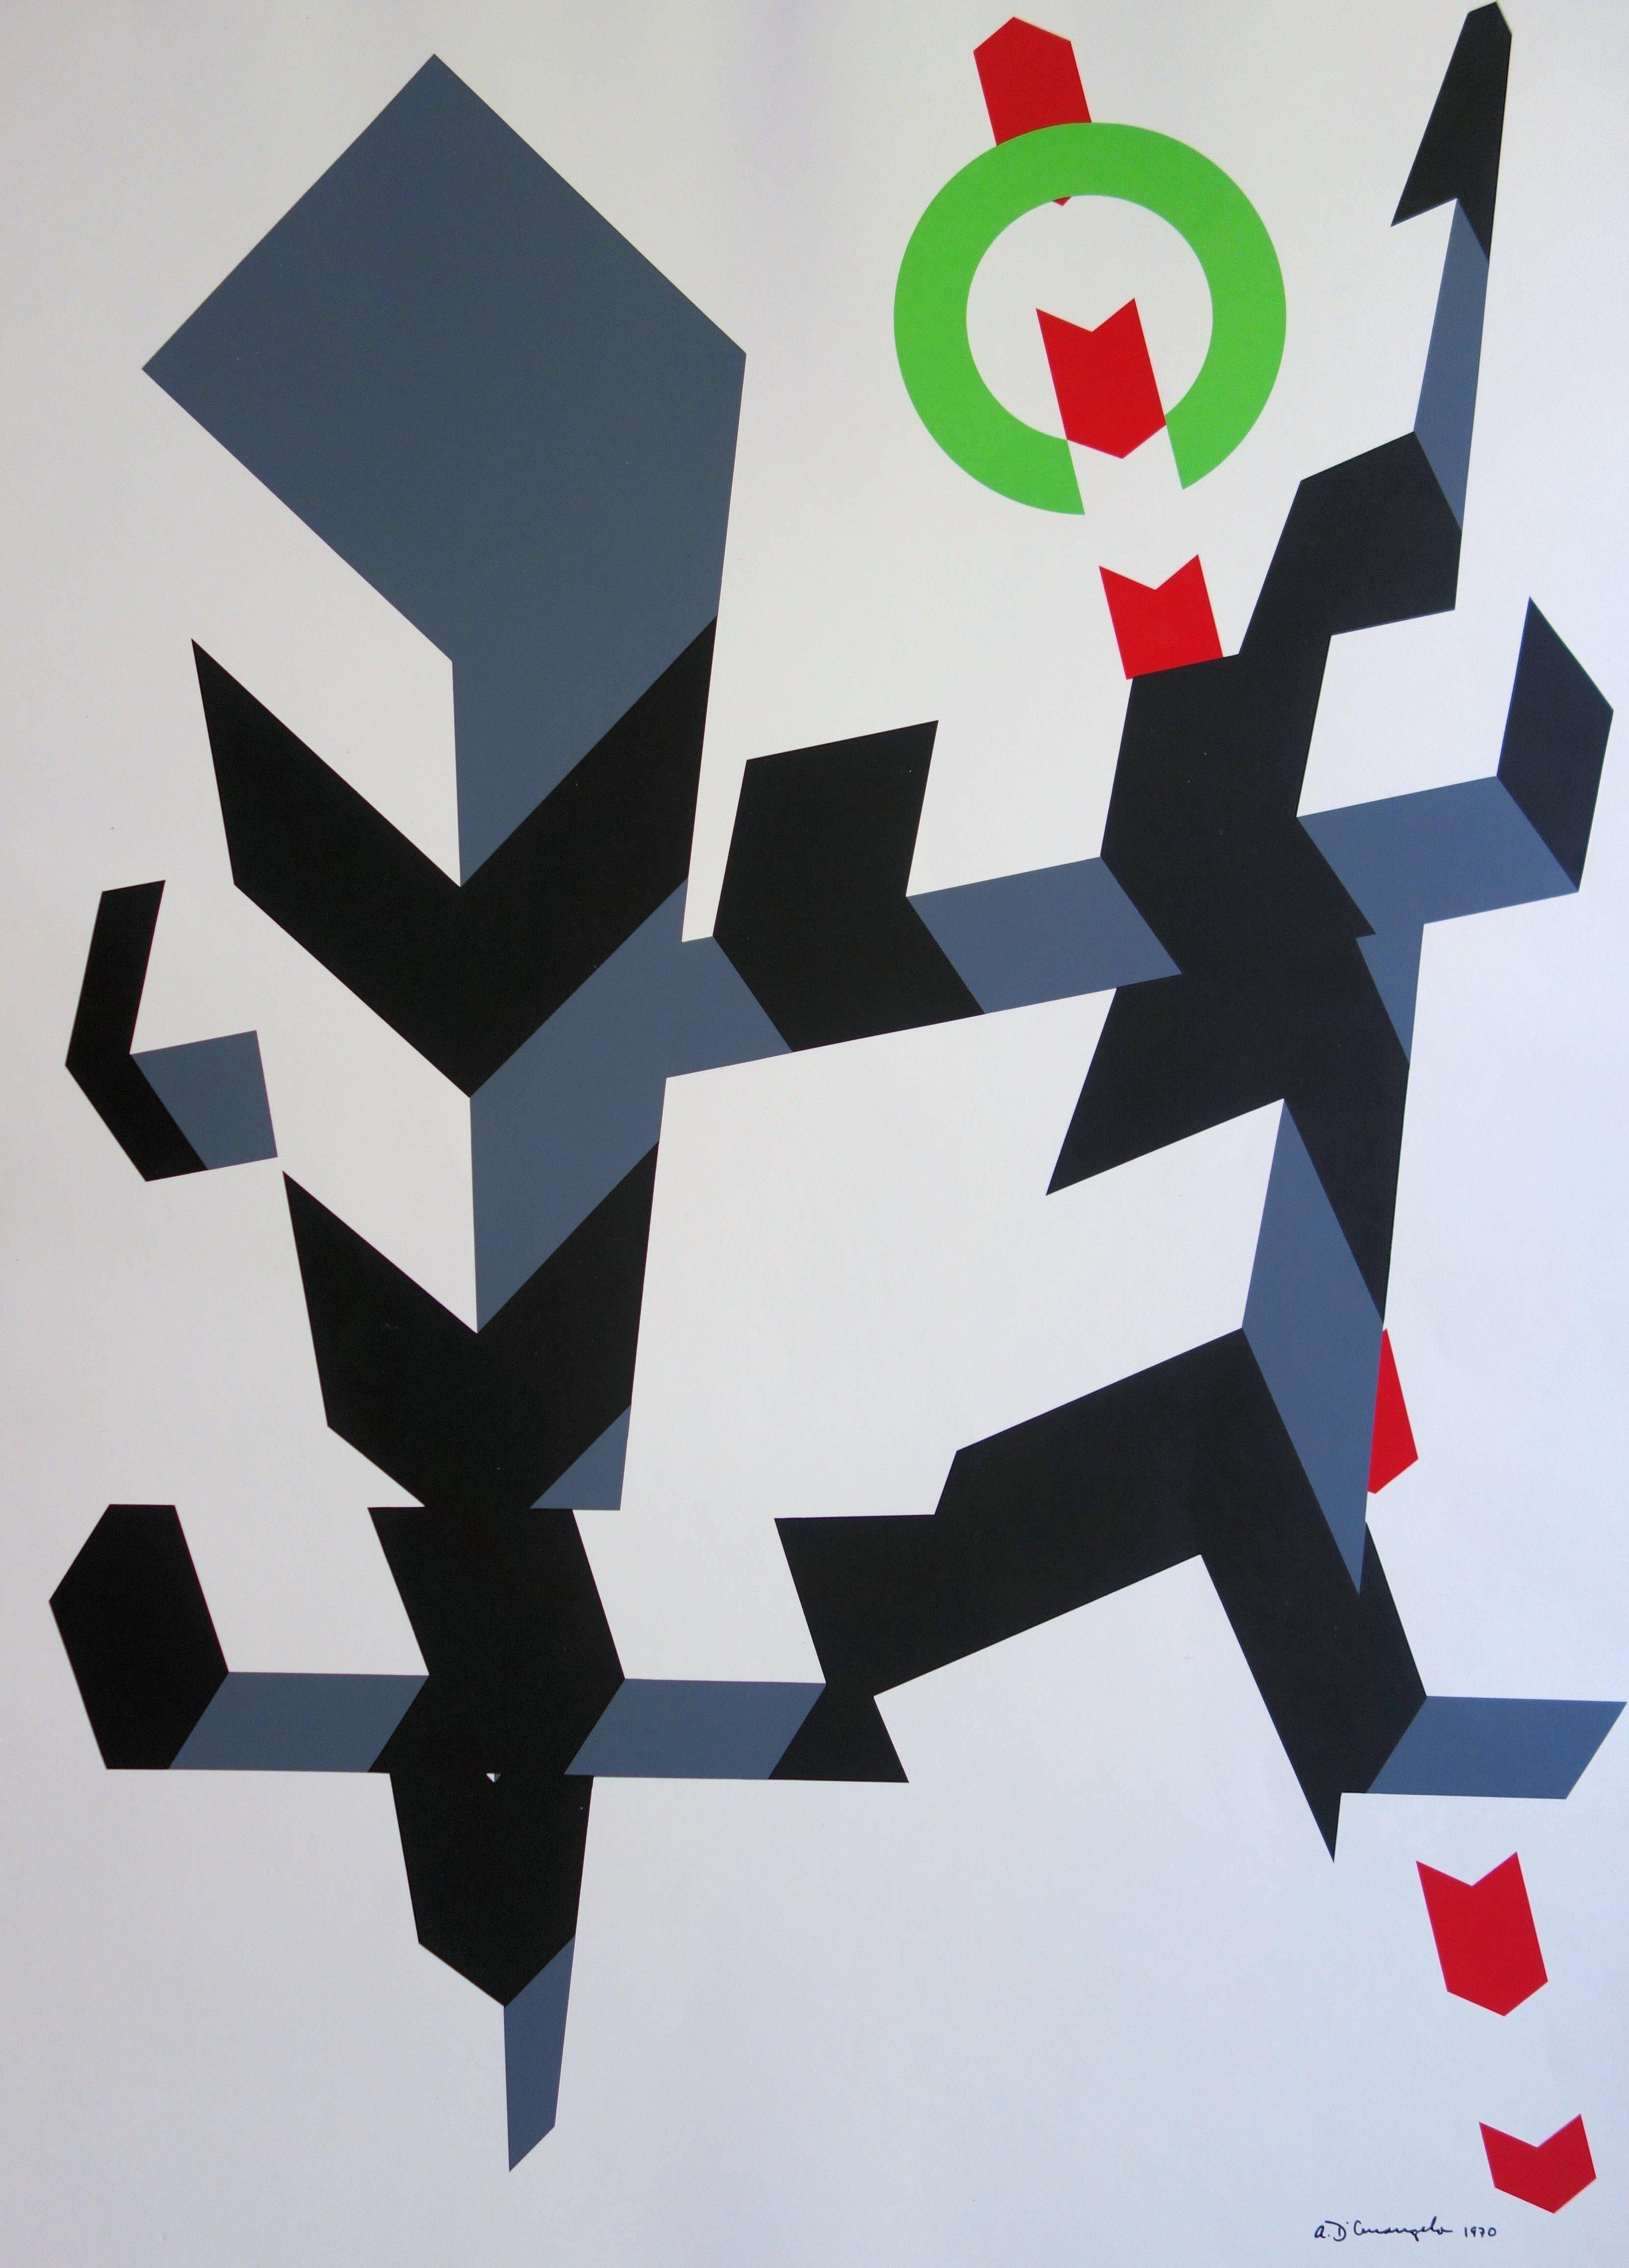 Abstract Cinetic Composition - Screenprint (Olympic Games Munich 1972) - Abstract Geometric Print by Allan D'Arcangelo